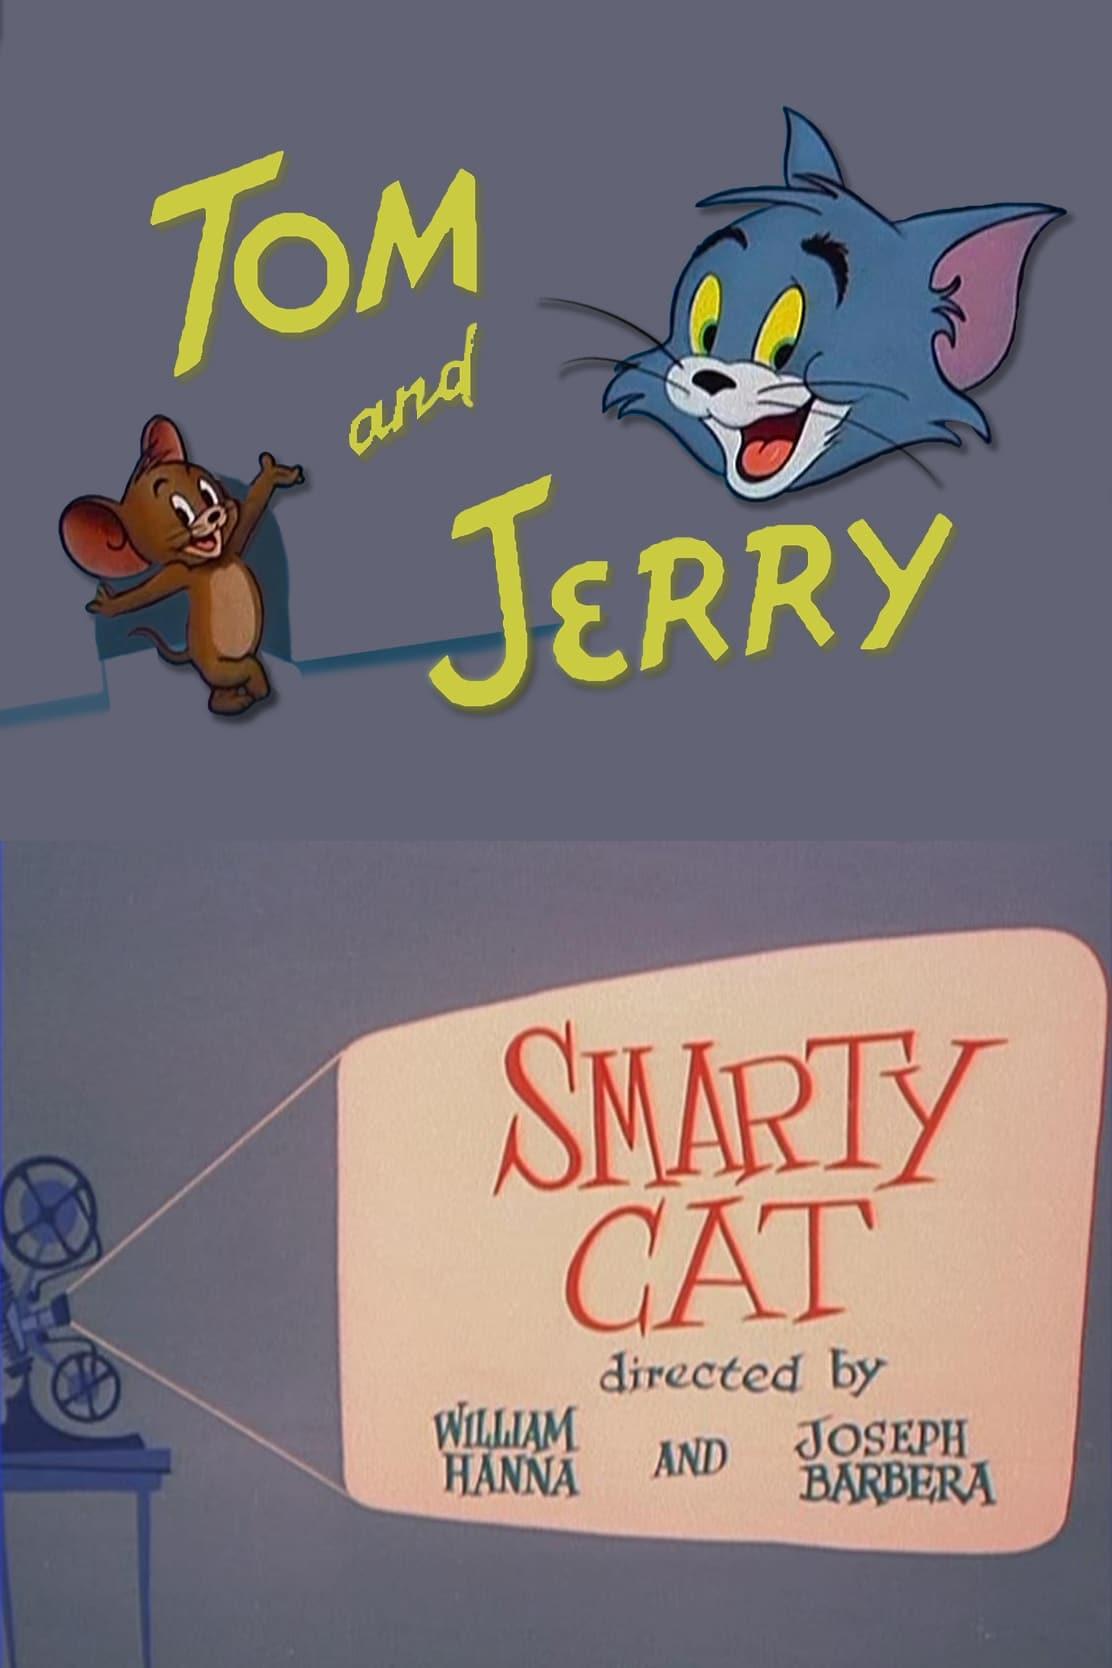 Smarty Cat poster